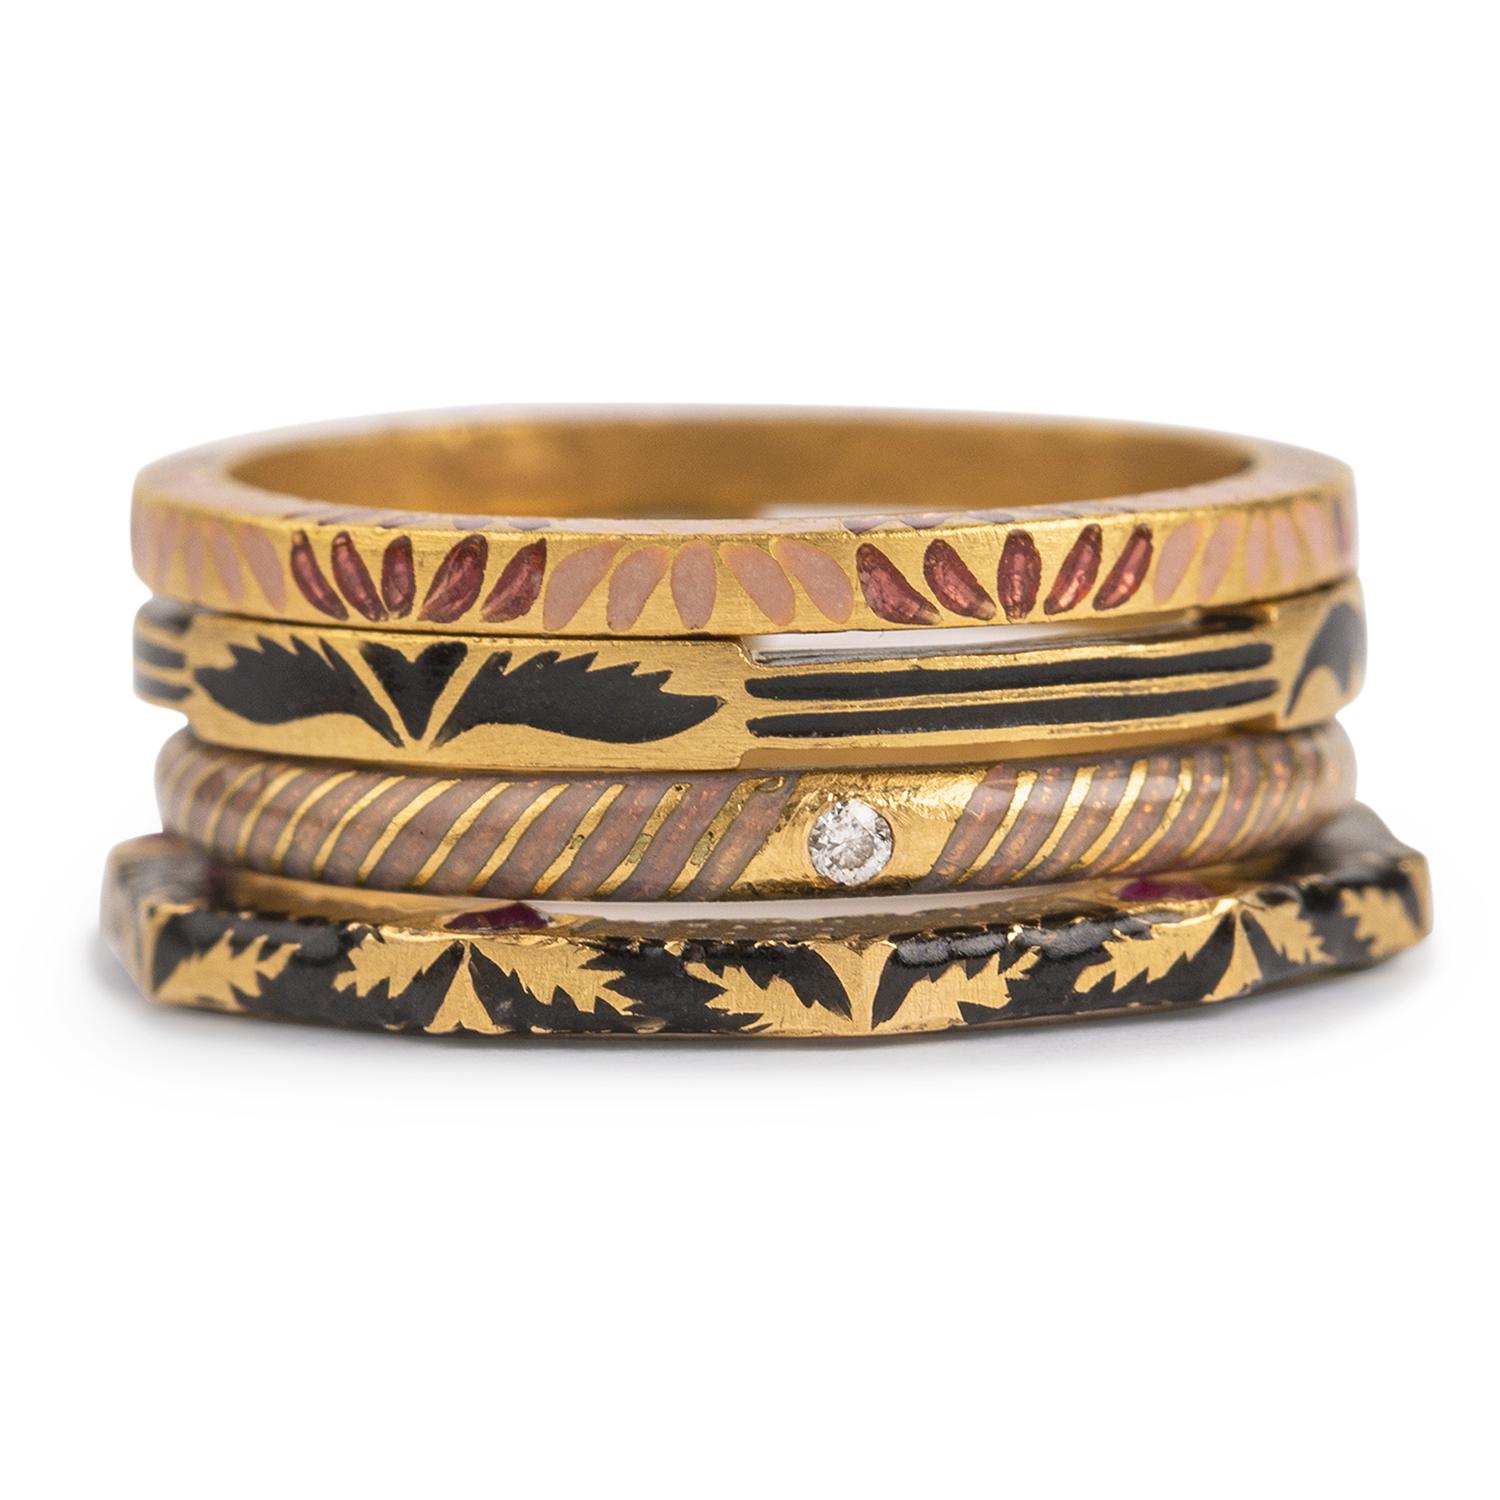 For Sale:  22K Gold Handmade Floral Enamel Stackable Infinity Band Rings Set of 4 by Agaro